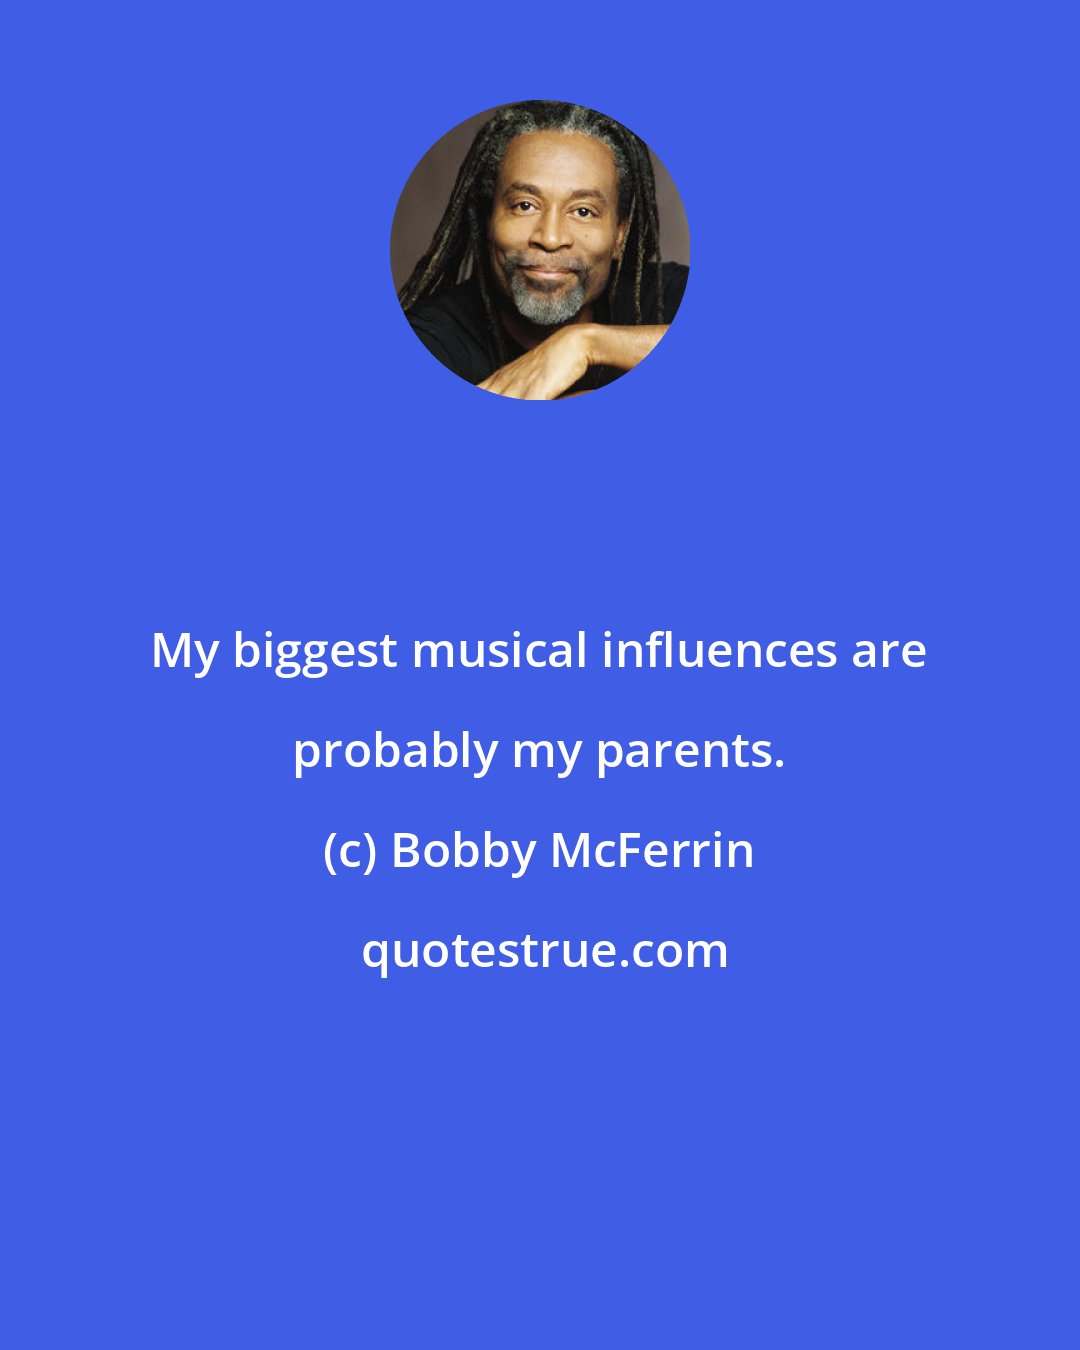 Bobby McFerrin: My biggest musical influences are probably my parents.